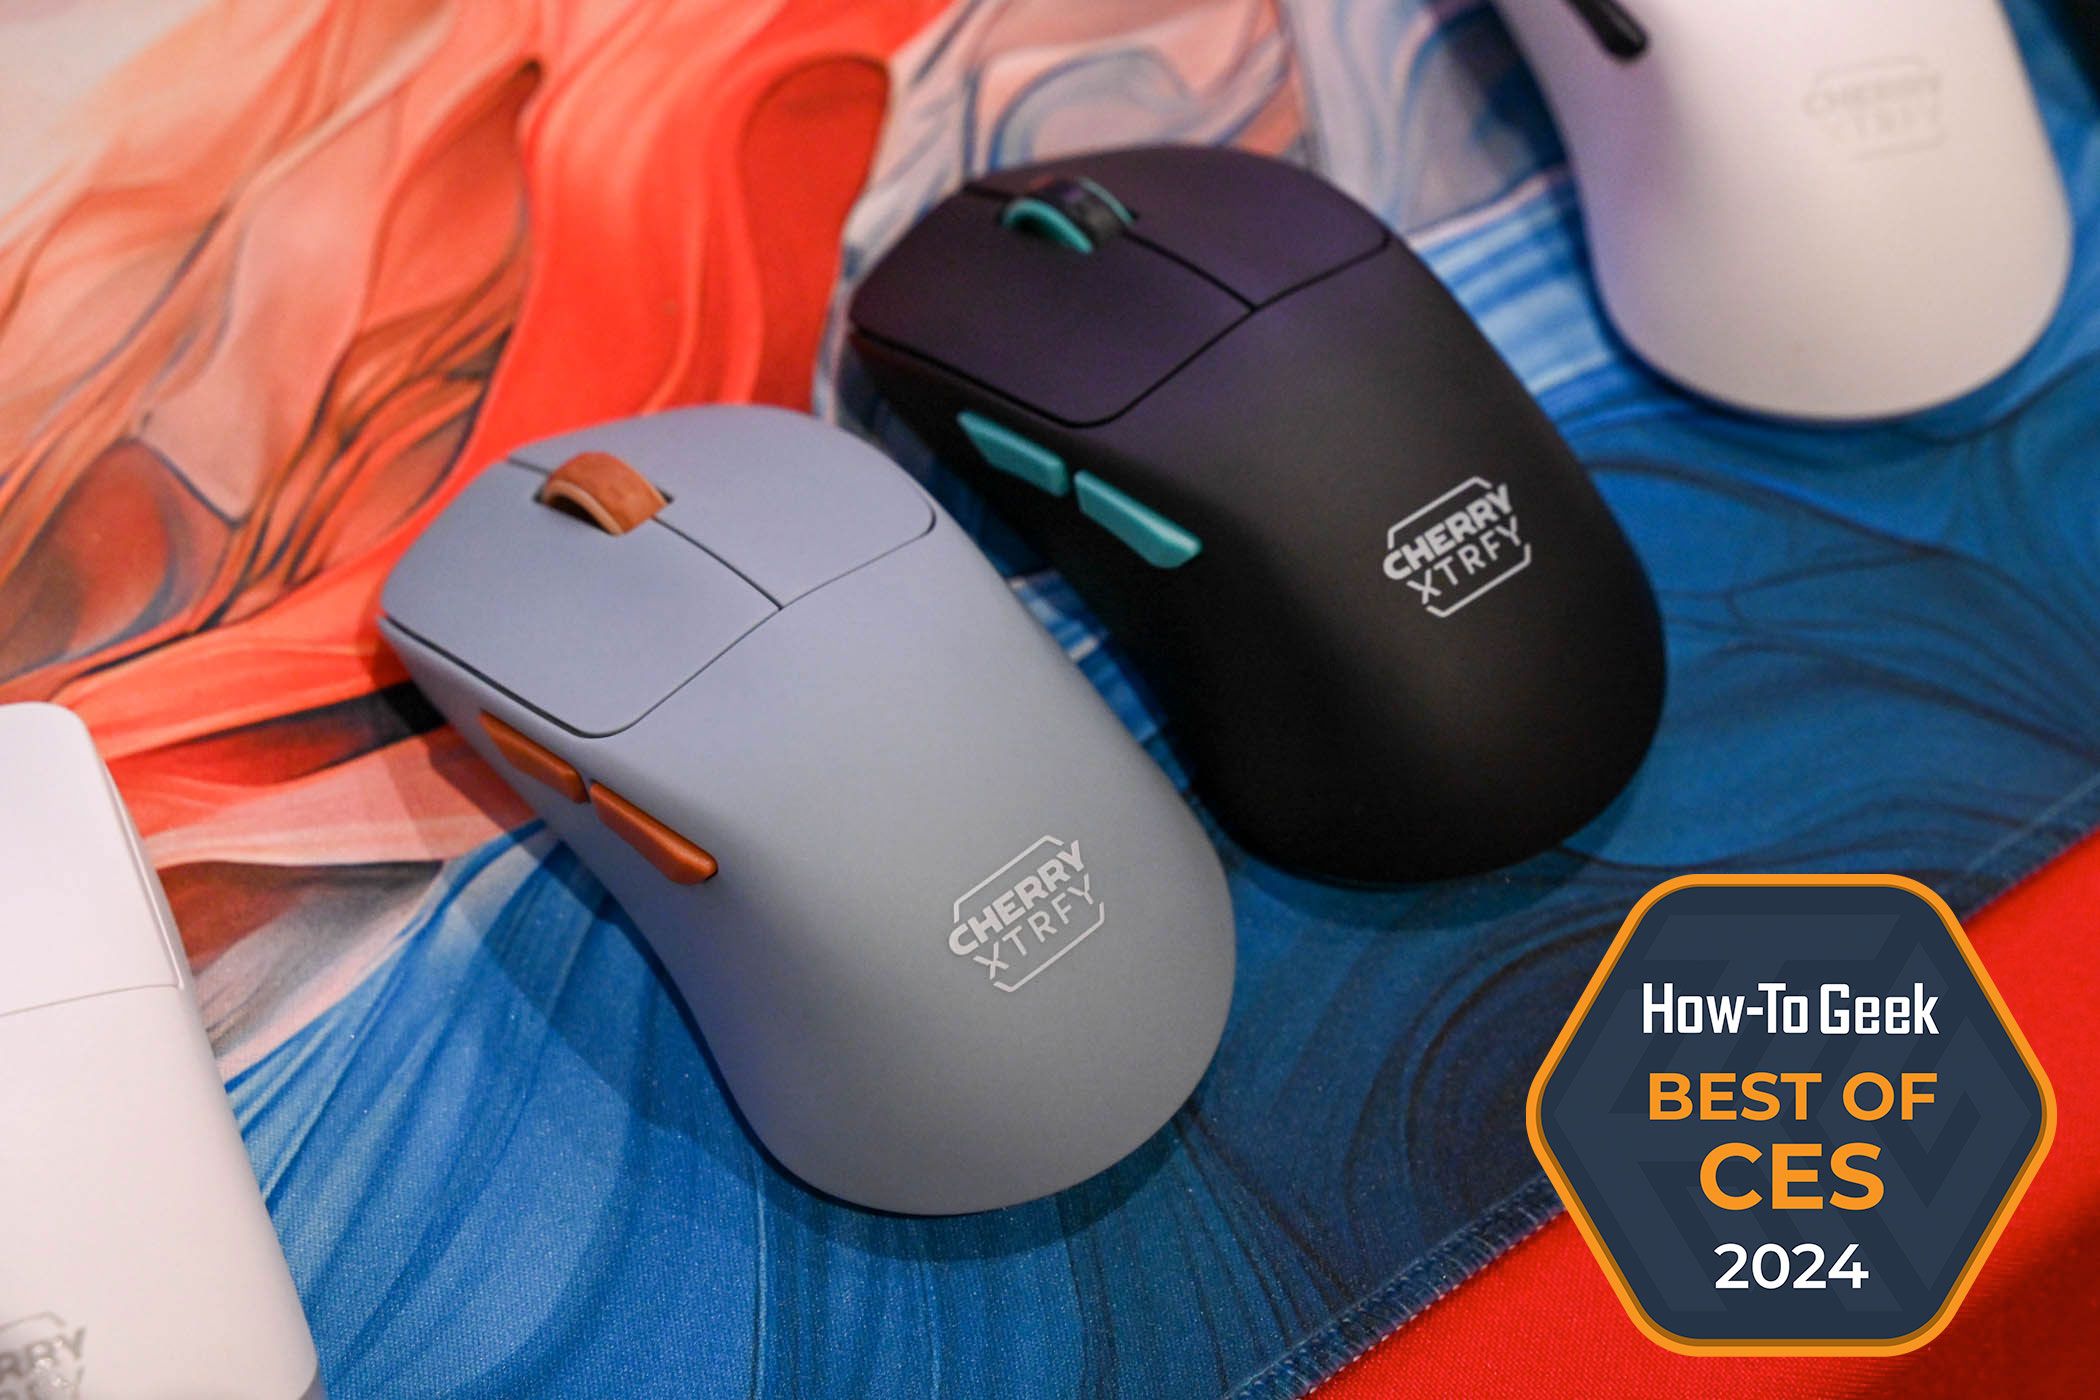 Cherry M64 Pro Wireless Mouse at CES 2024